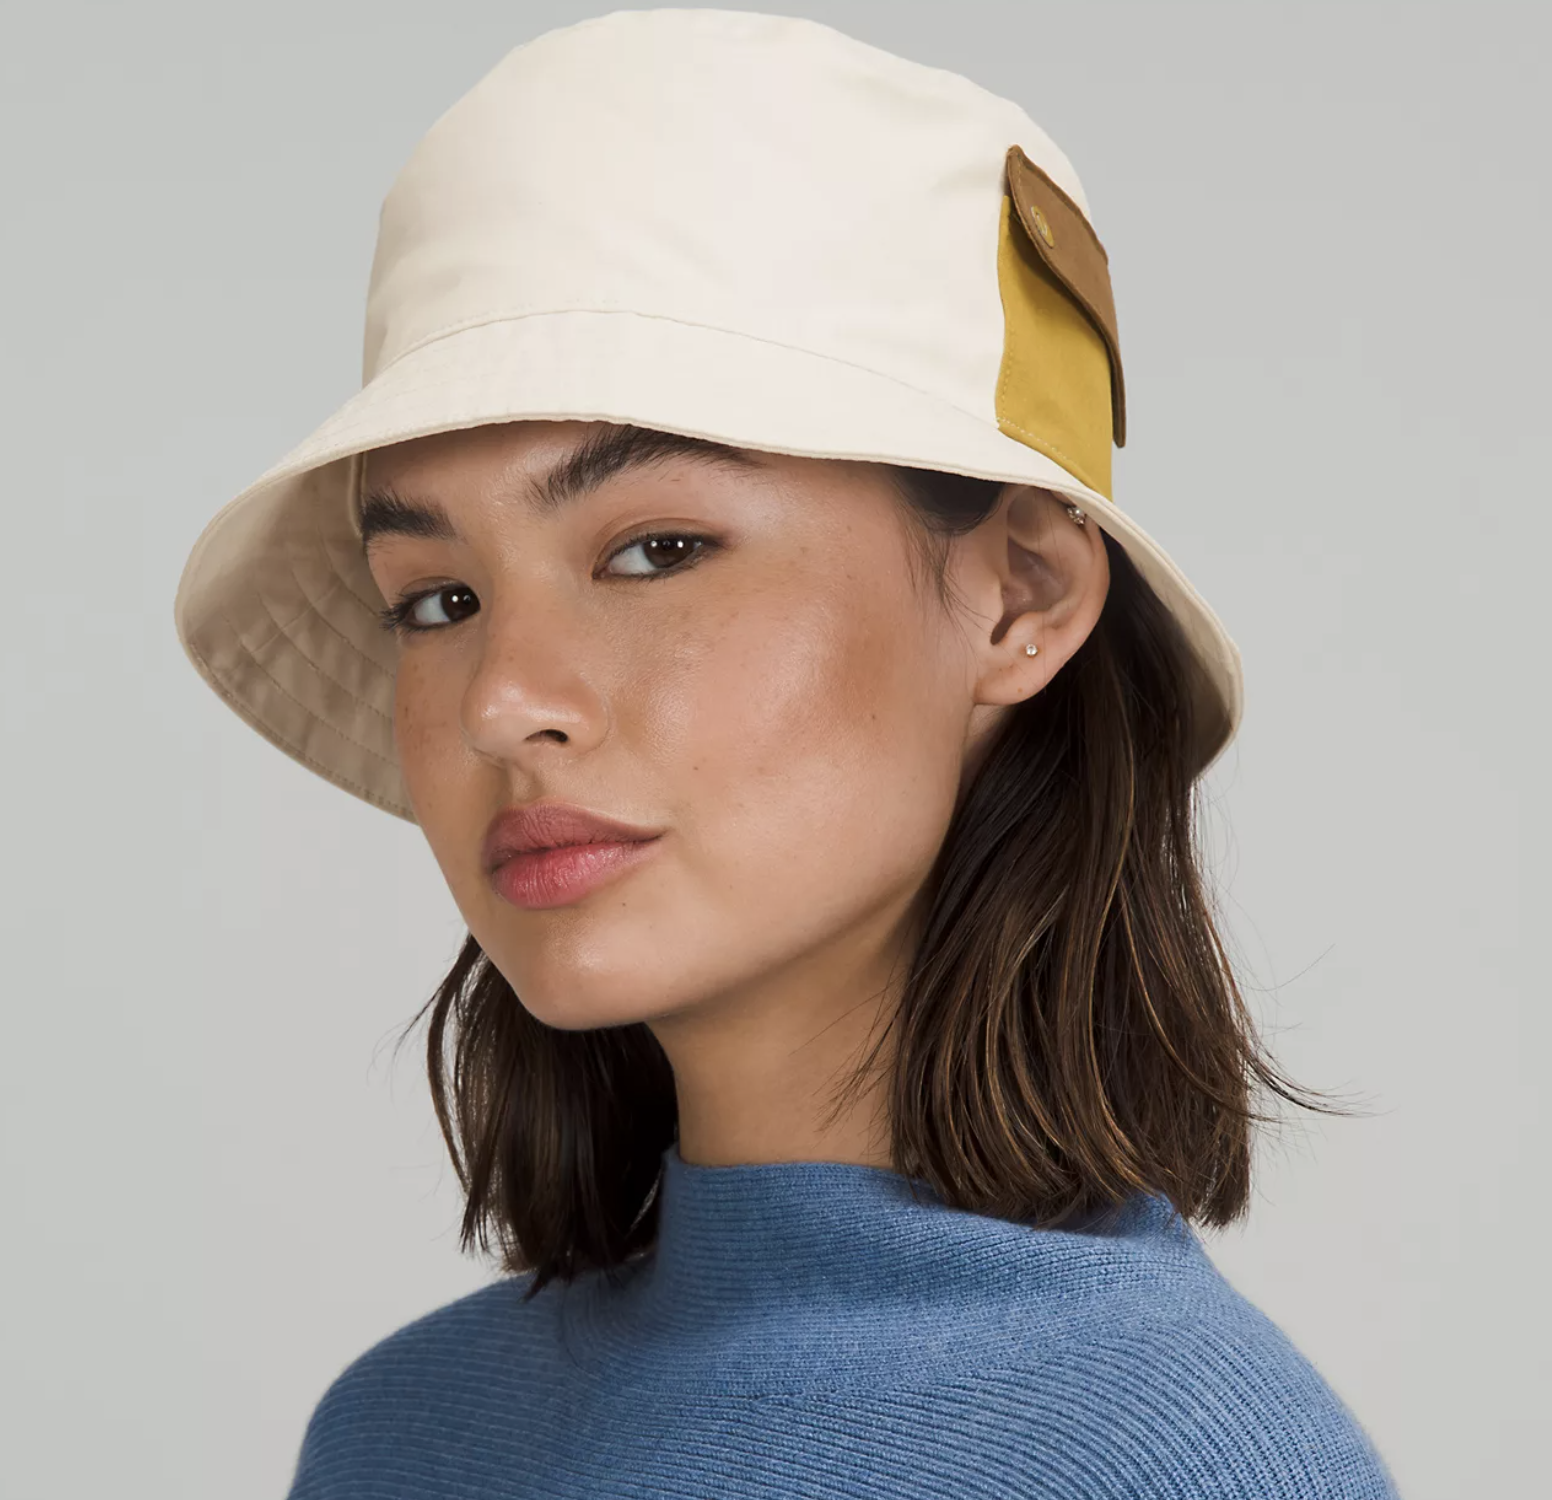 A person wearing the bucket hat with a sweater